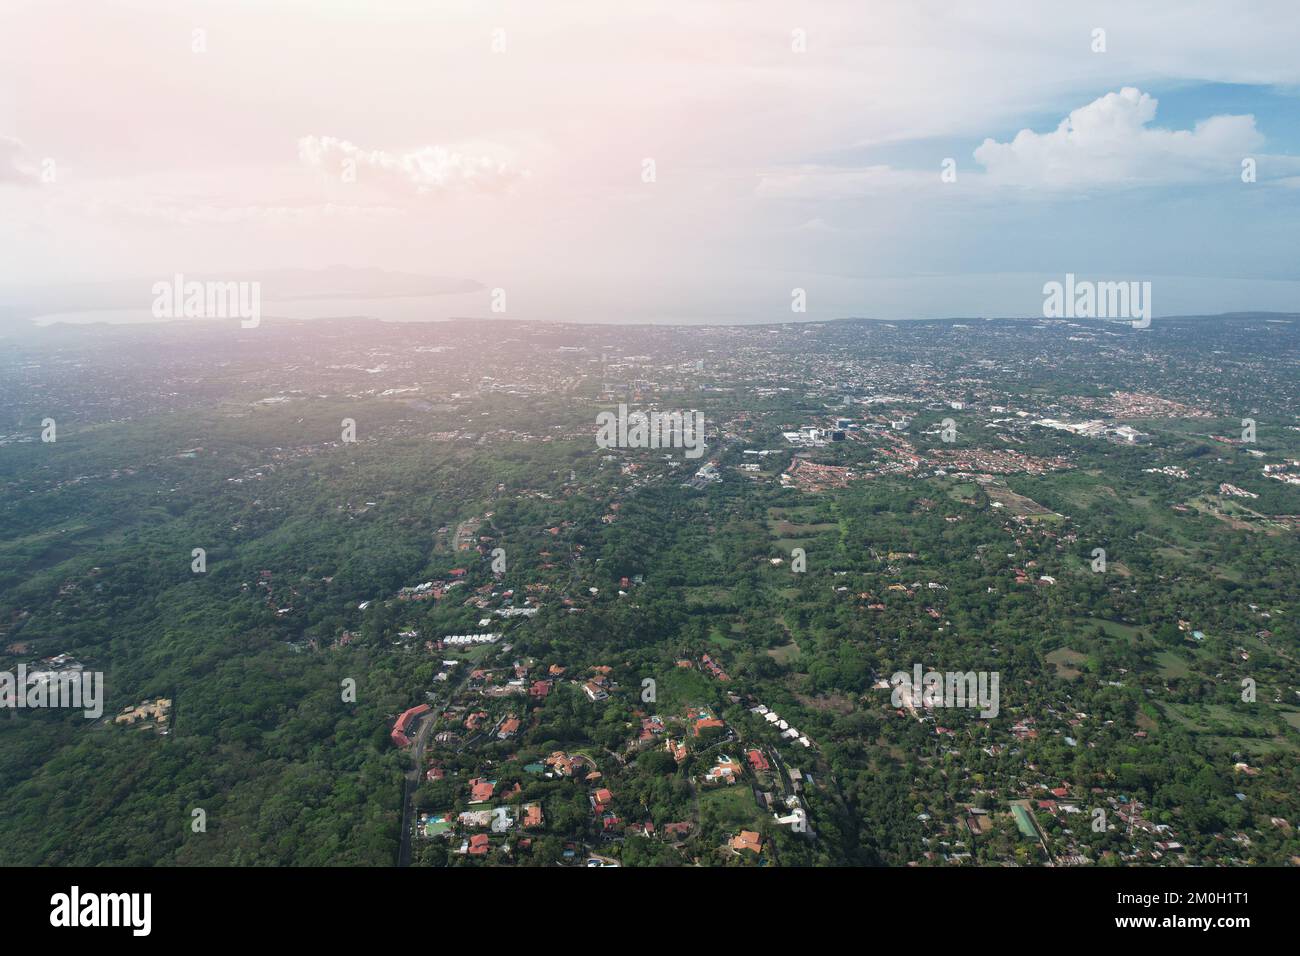 Central america Nicaragua landscape aerial drone view Stock Photo